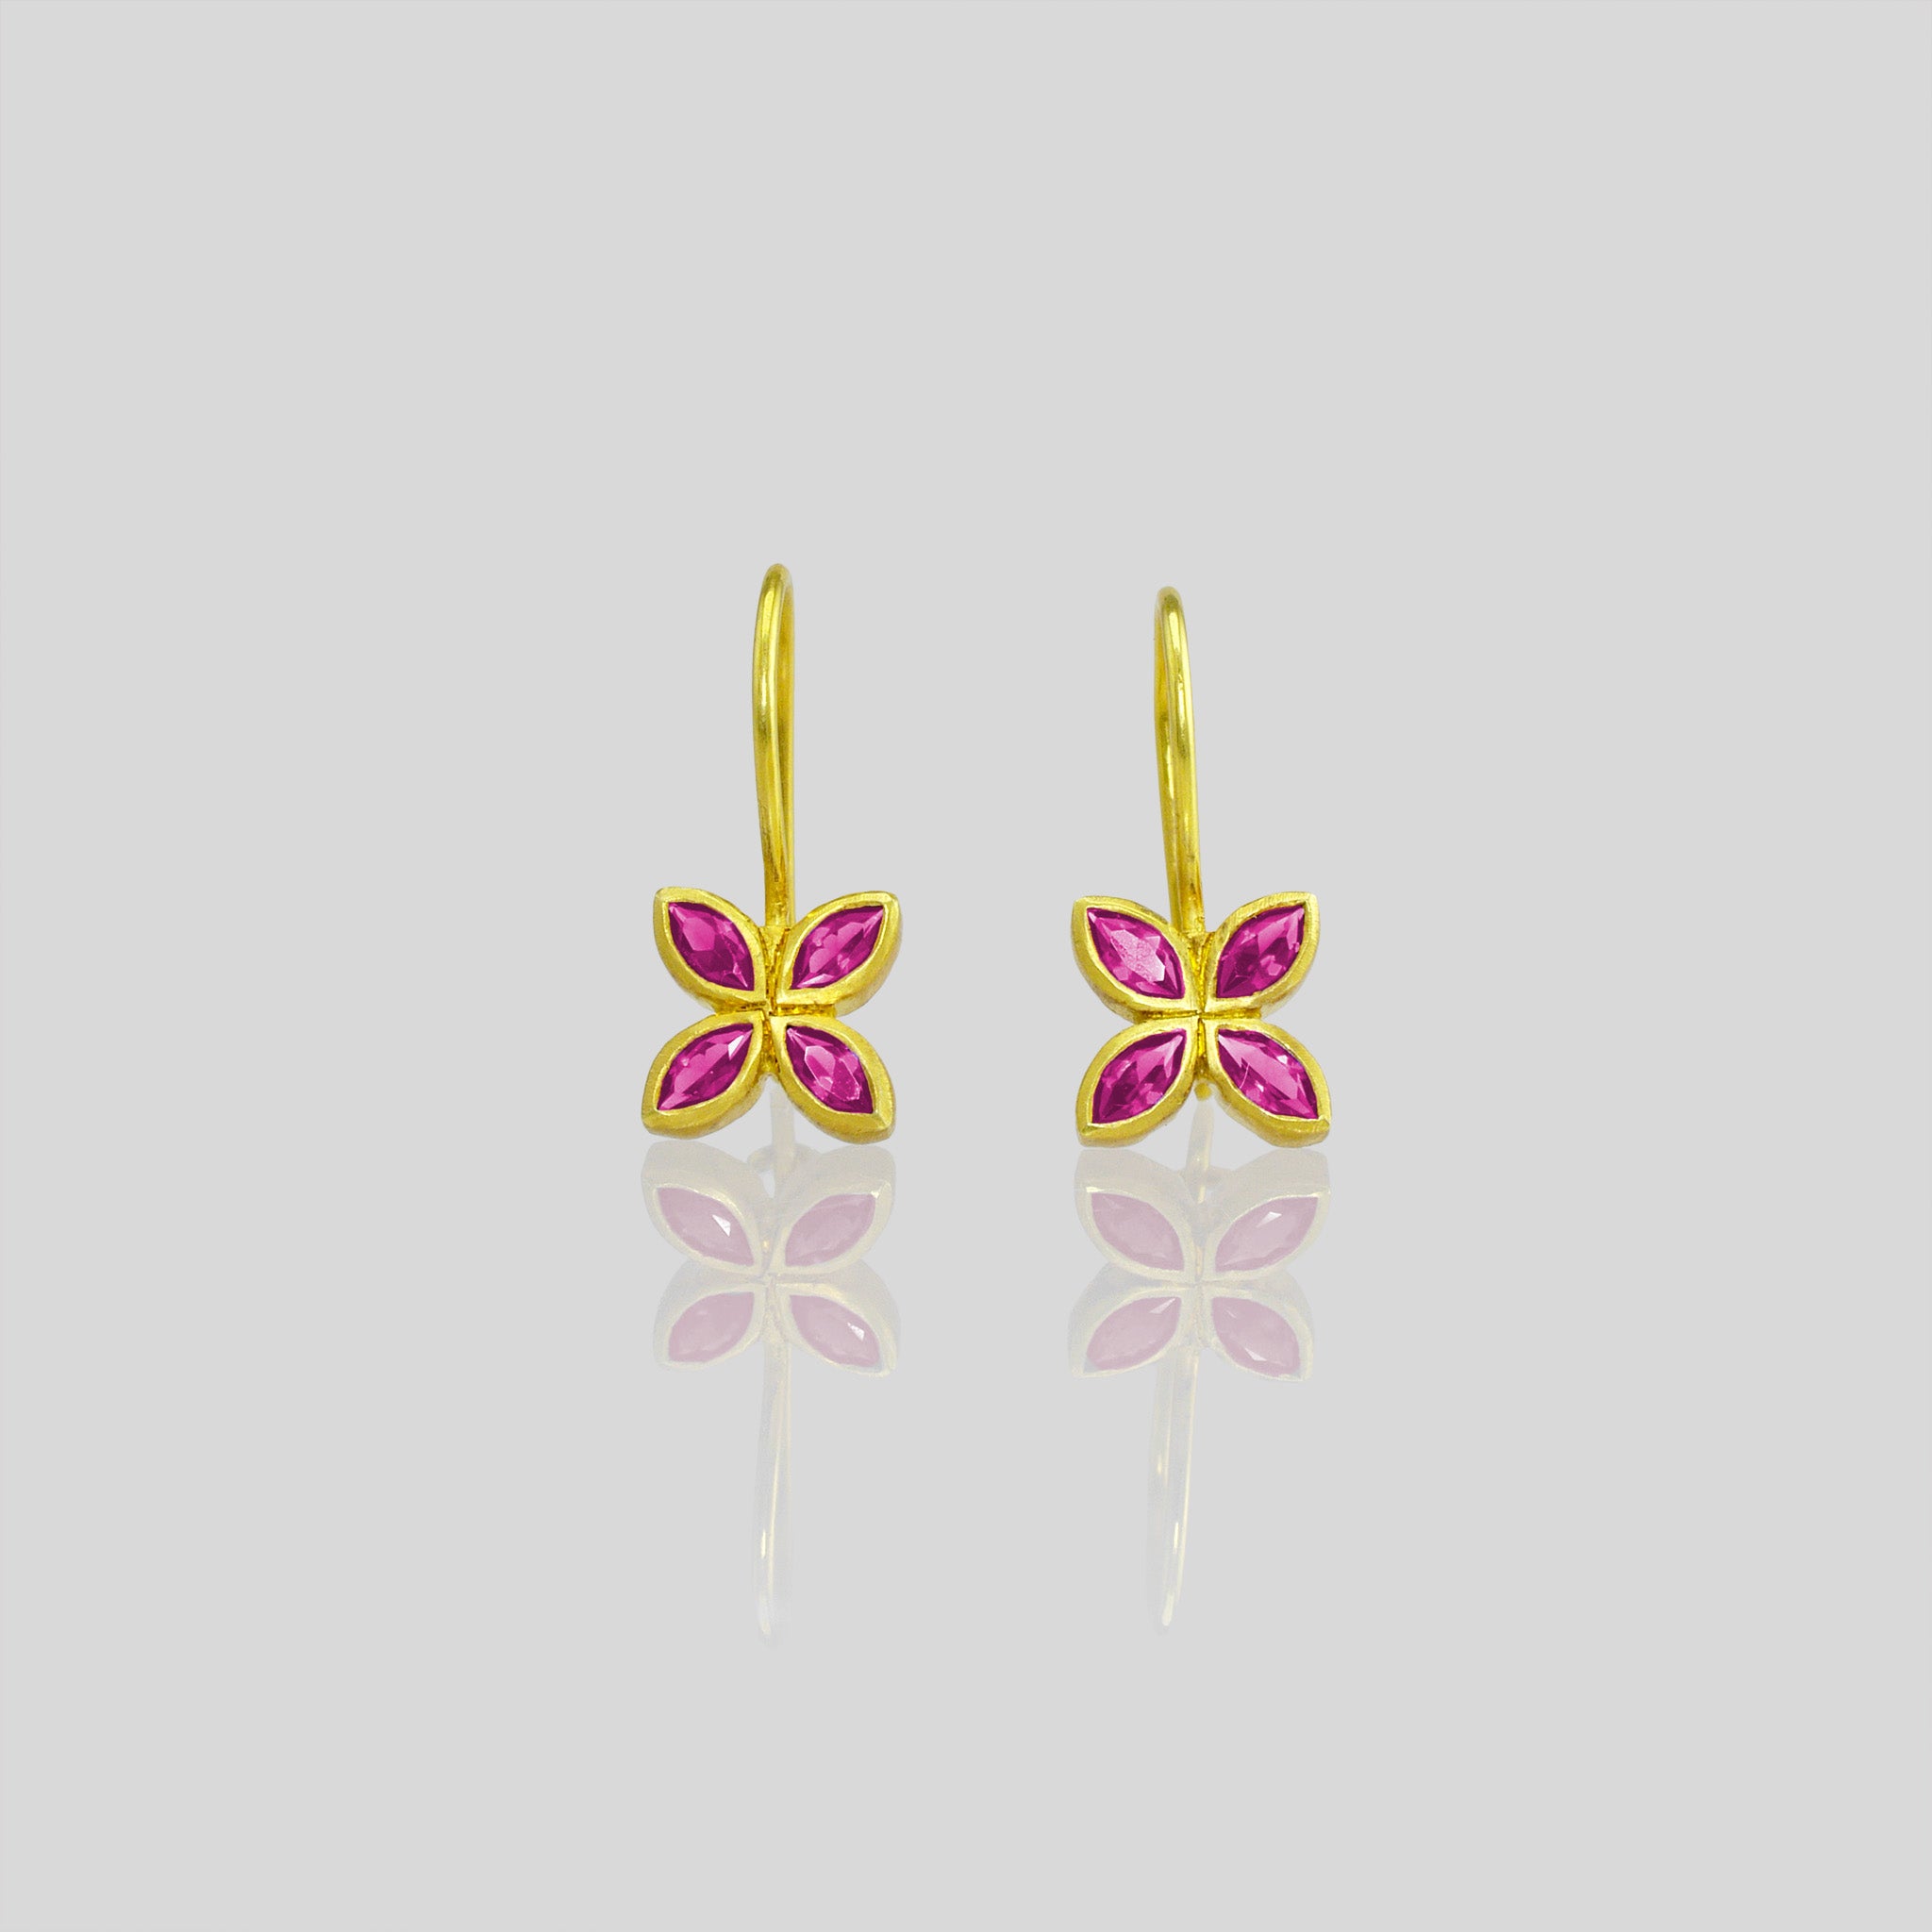 close up of Dazzling Ruby flower earrings, crafted from 4 marquise gemstones. Lightweight, colorful and vibrant.